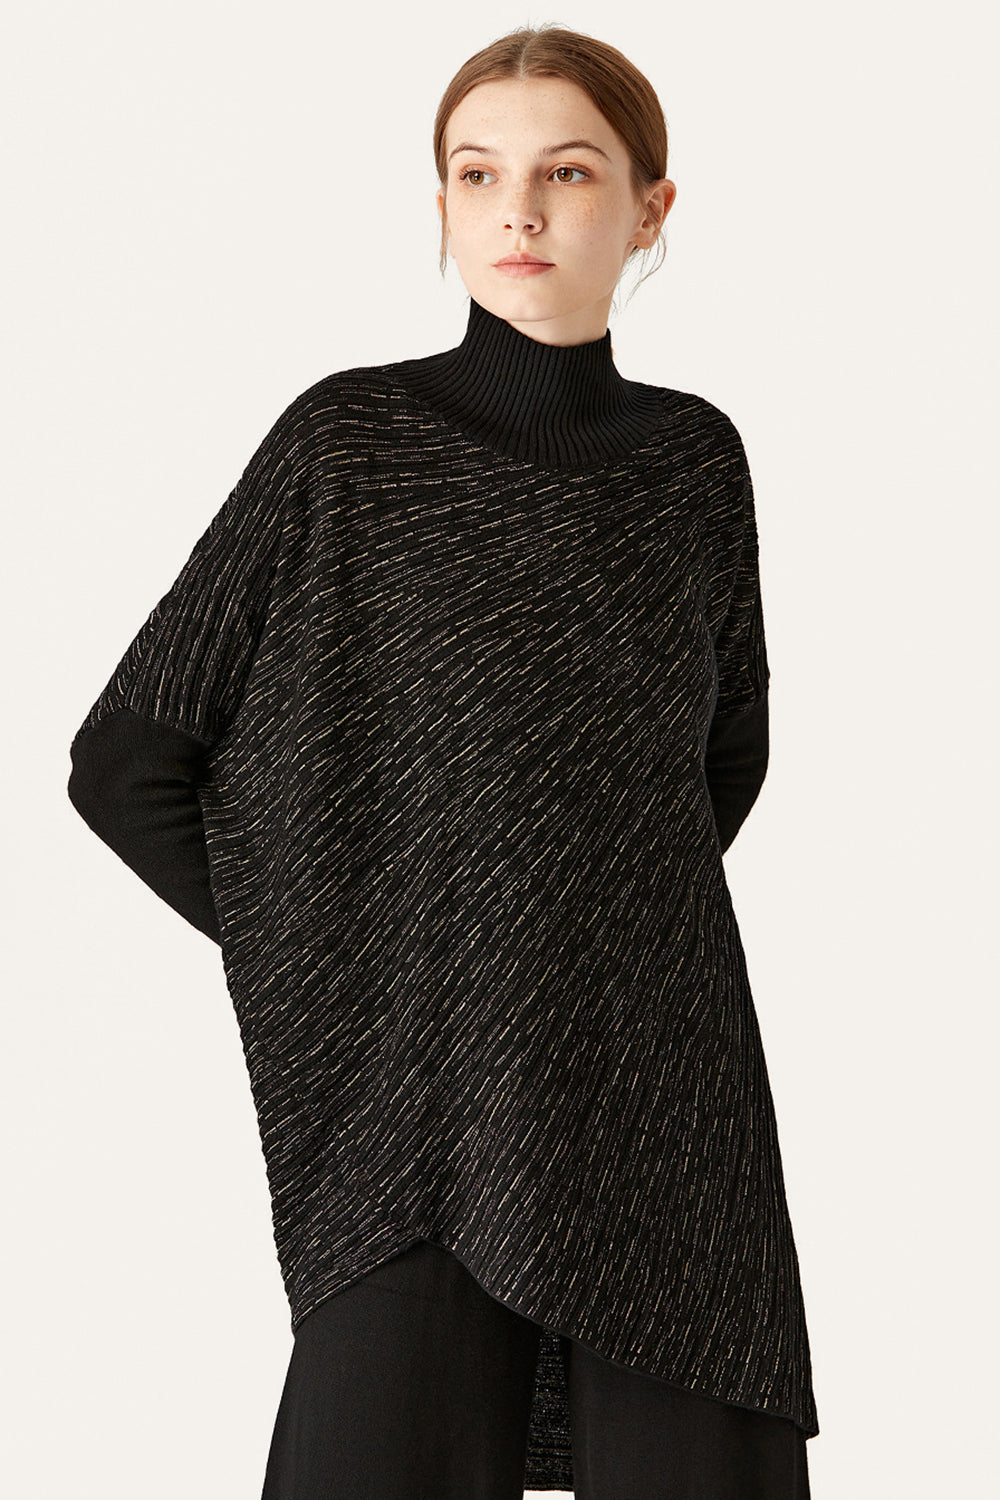 Black Asymmetrical Knitted Poncho Sweater